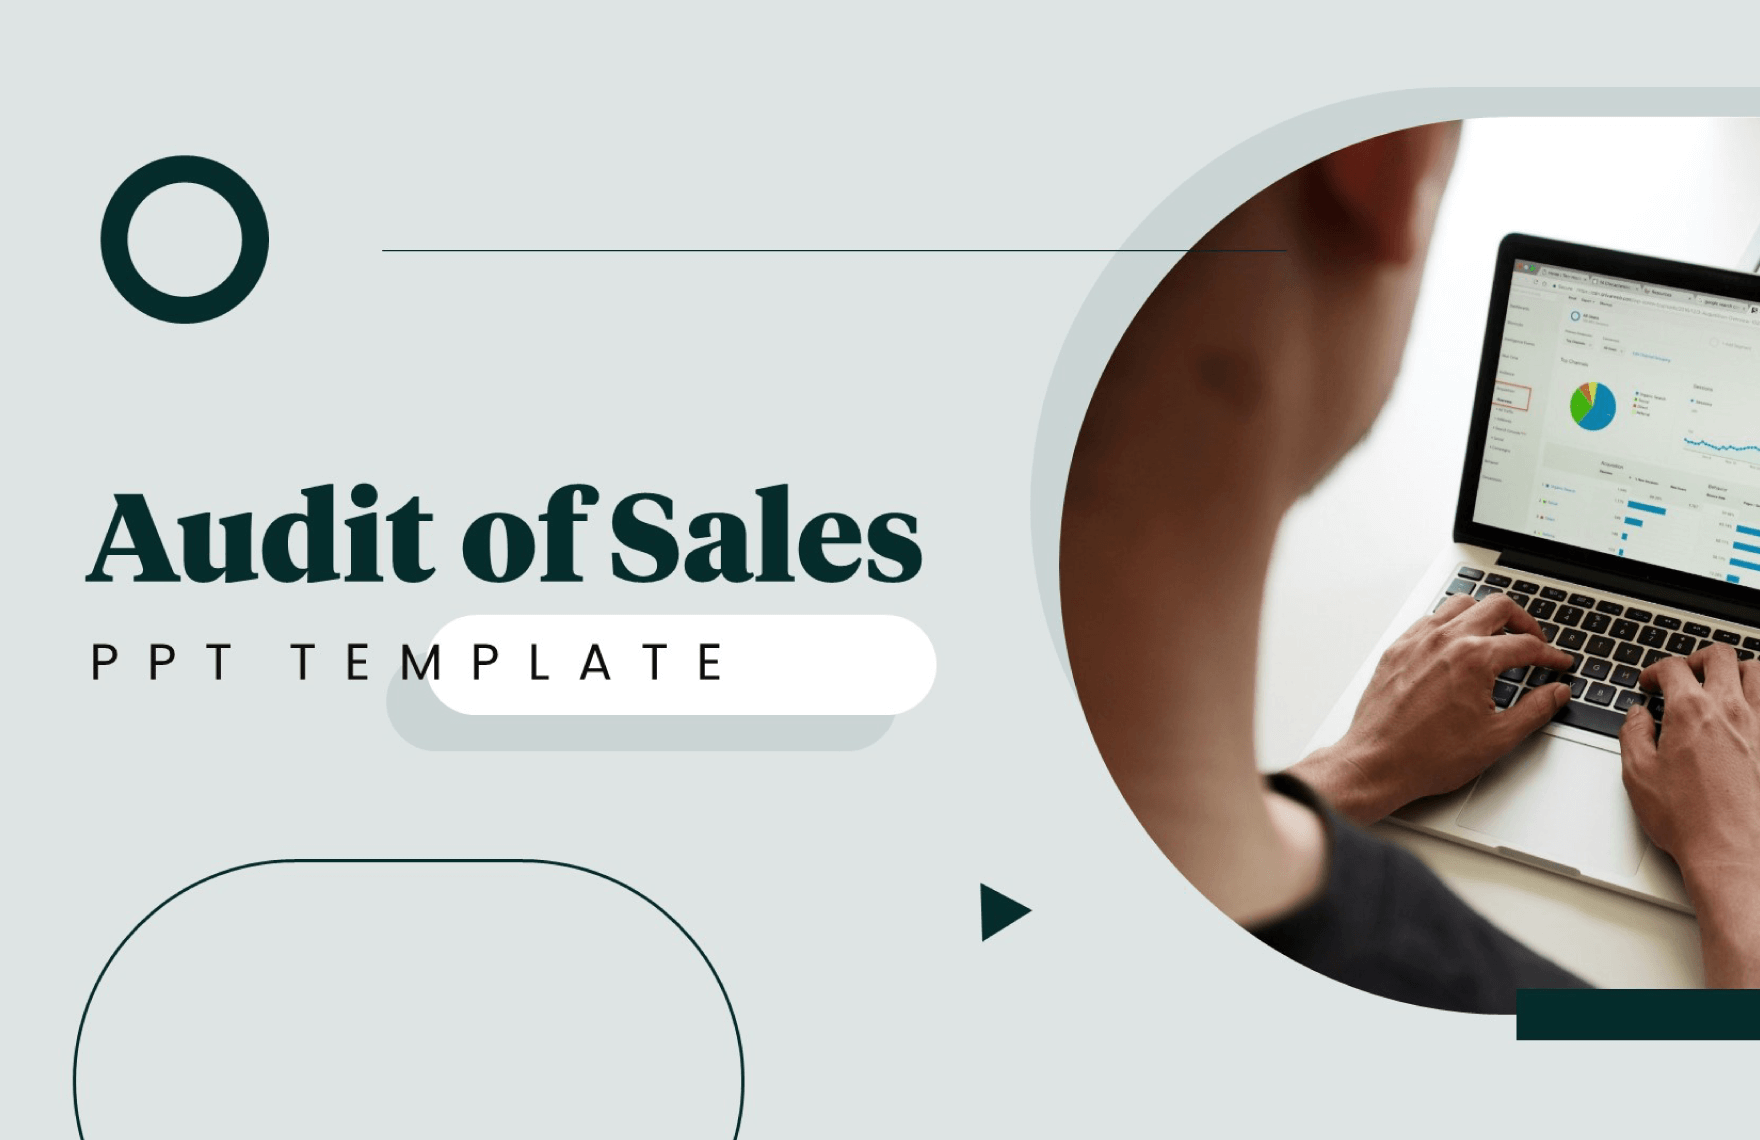 Audit of Sales PPT Template